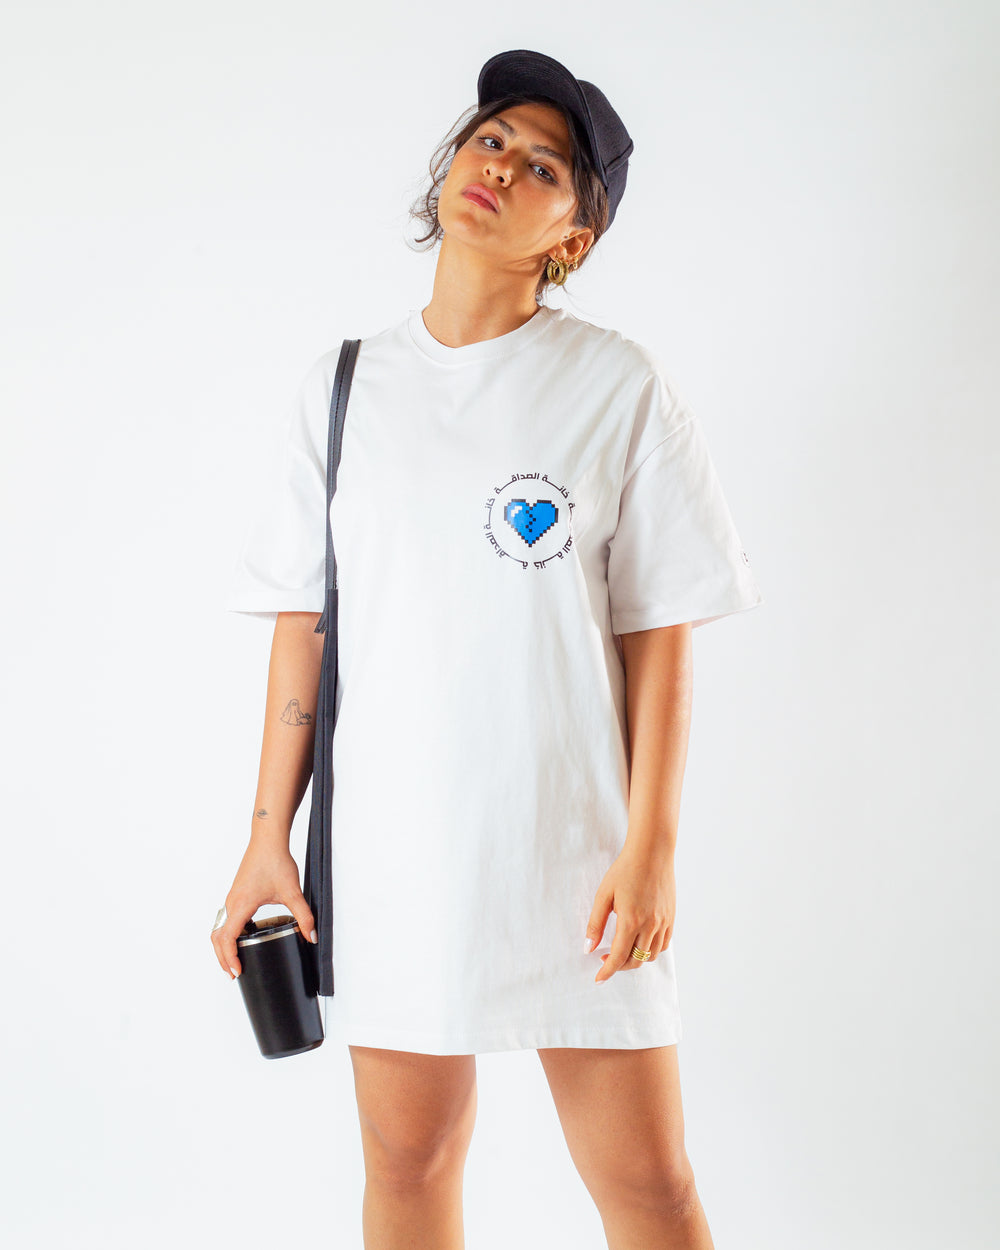 Young adult female wearing an Oversized white T-Dress with Khanat Al Sadaka written in arabic خانة الصداقة and printed in blue and black silkscreen on the side of the dress along with black cap on her head, a black tote bag and a black coffee cup.